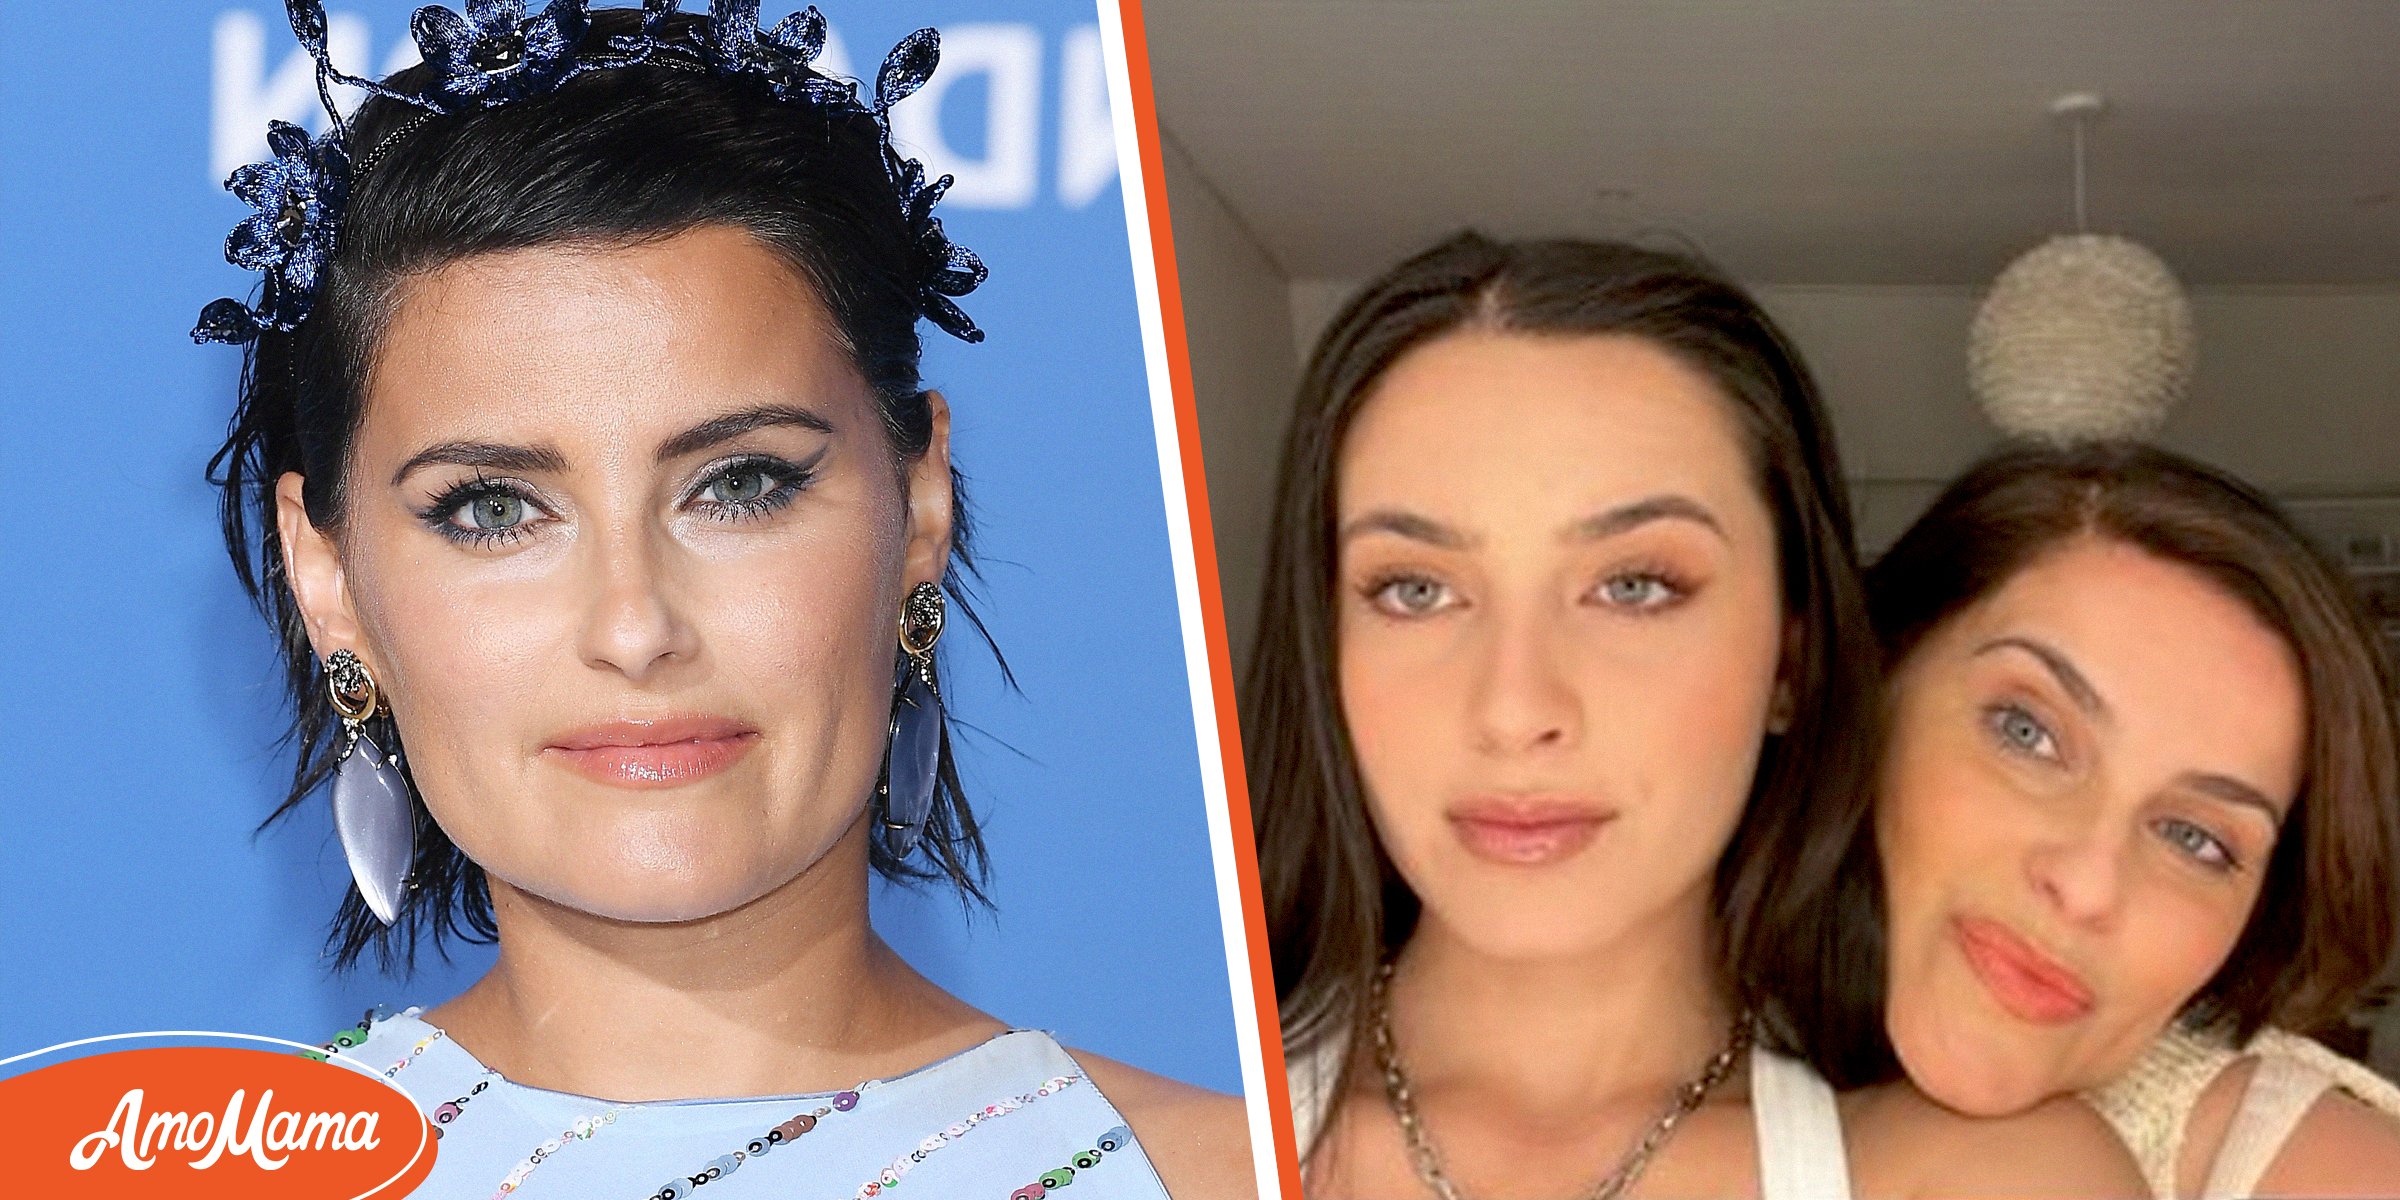 Nevis Gahunia Is Nelly Furtado's Daughter Who Seems to Have Inherited